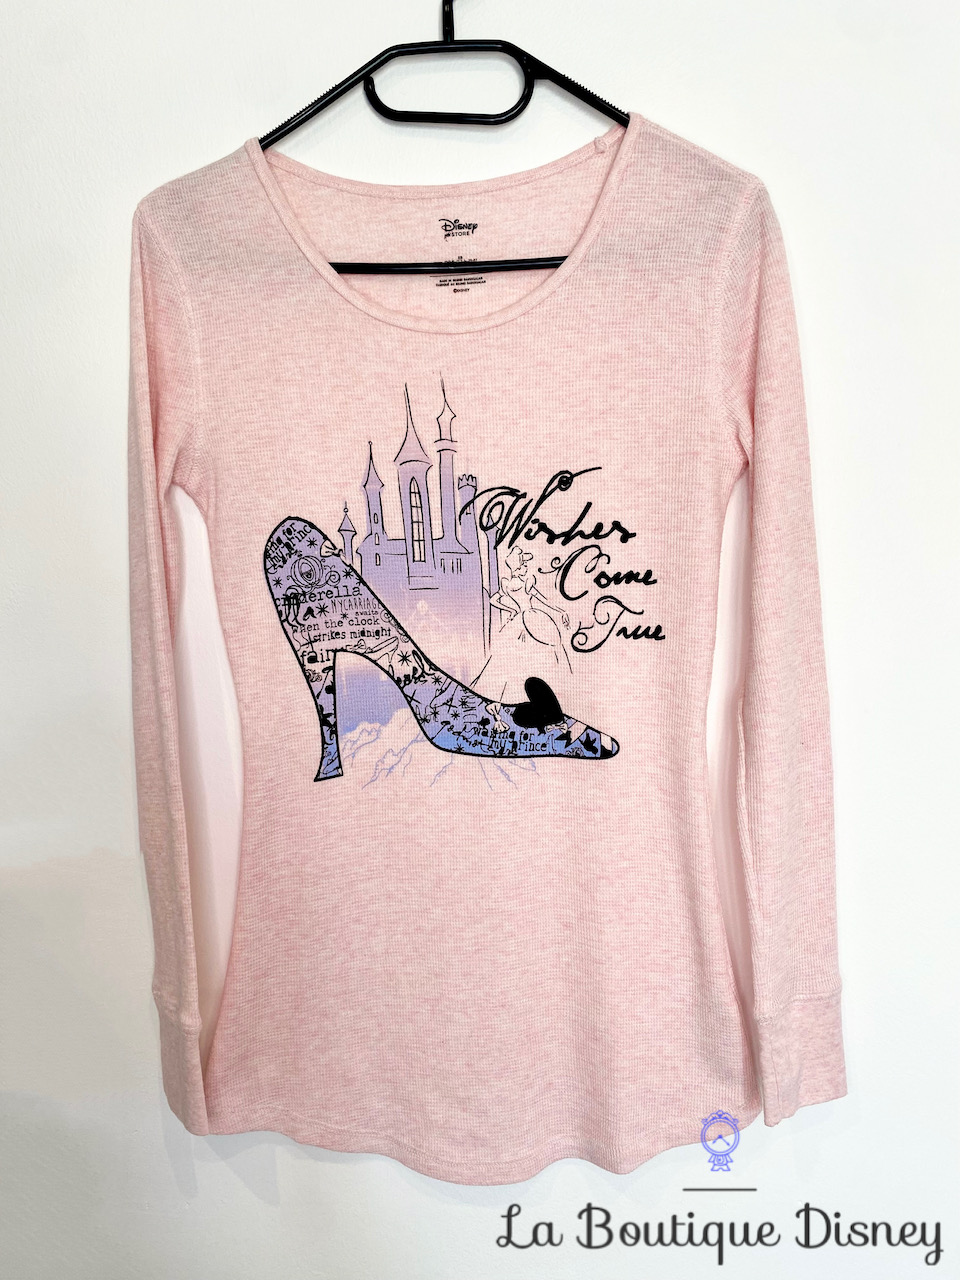 Sweat shirt Cendrillon Wishes Come True Disney Store taille XS rose chaussure